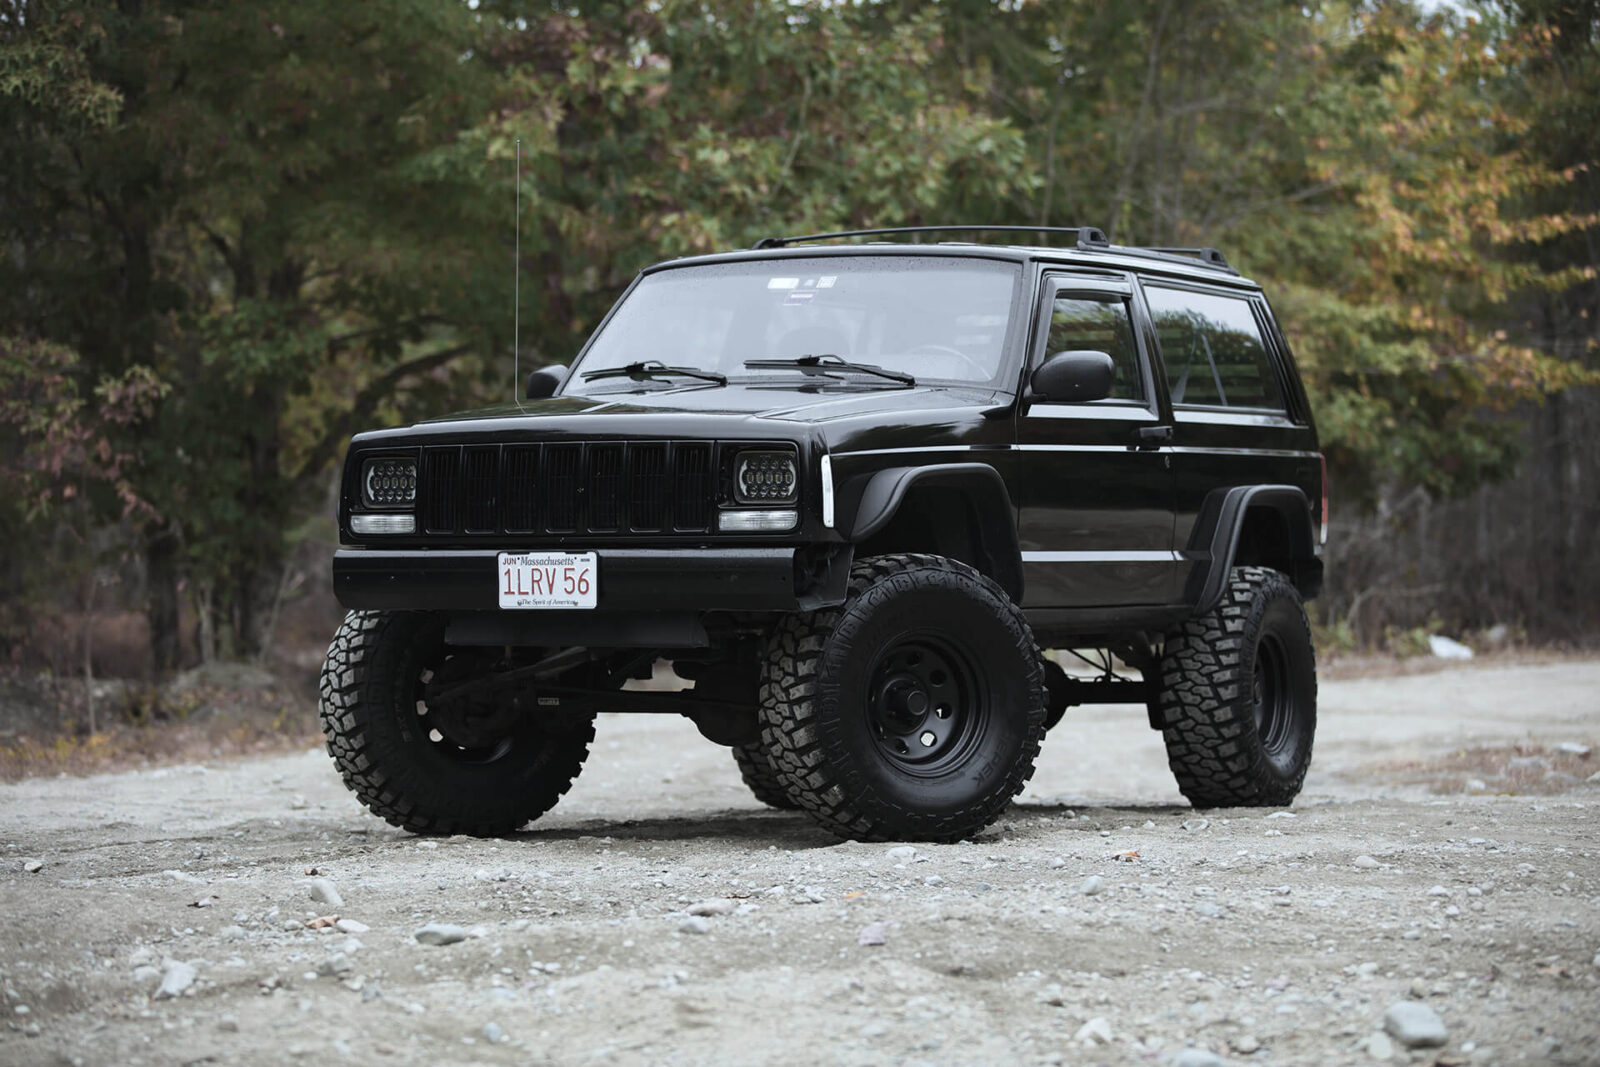 Life is Too Short to not Drive a Sick Jeep – Lifted Cherokee XJ on 33s